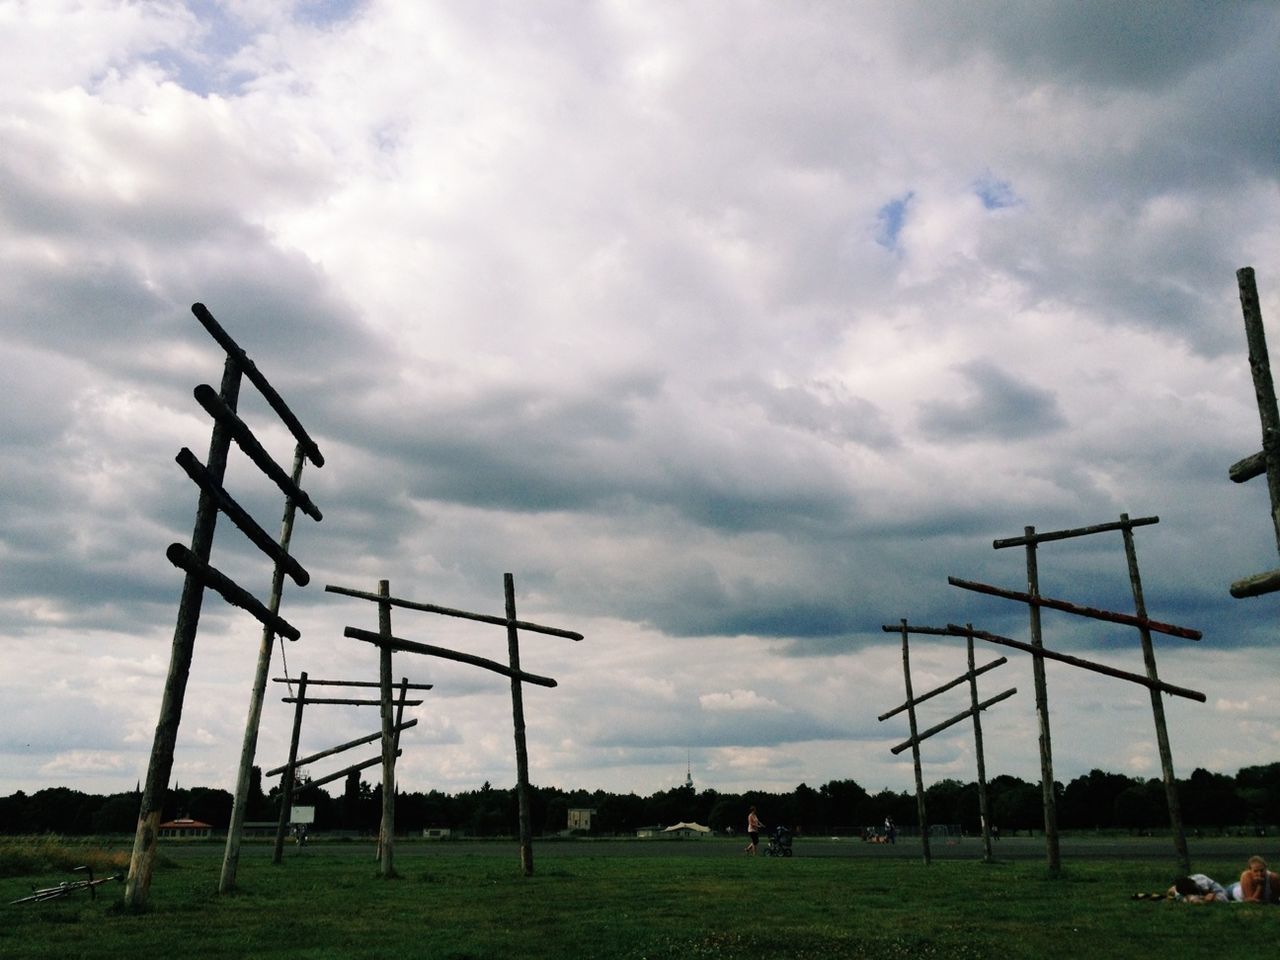 View of poles on countryside landscape against clouds